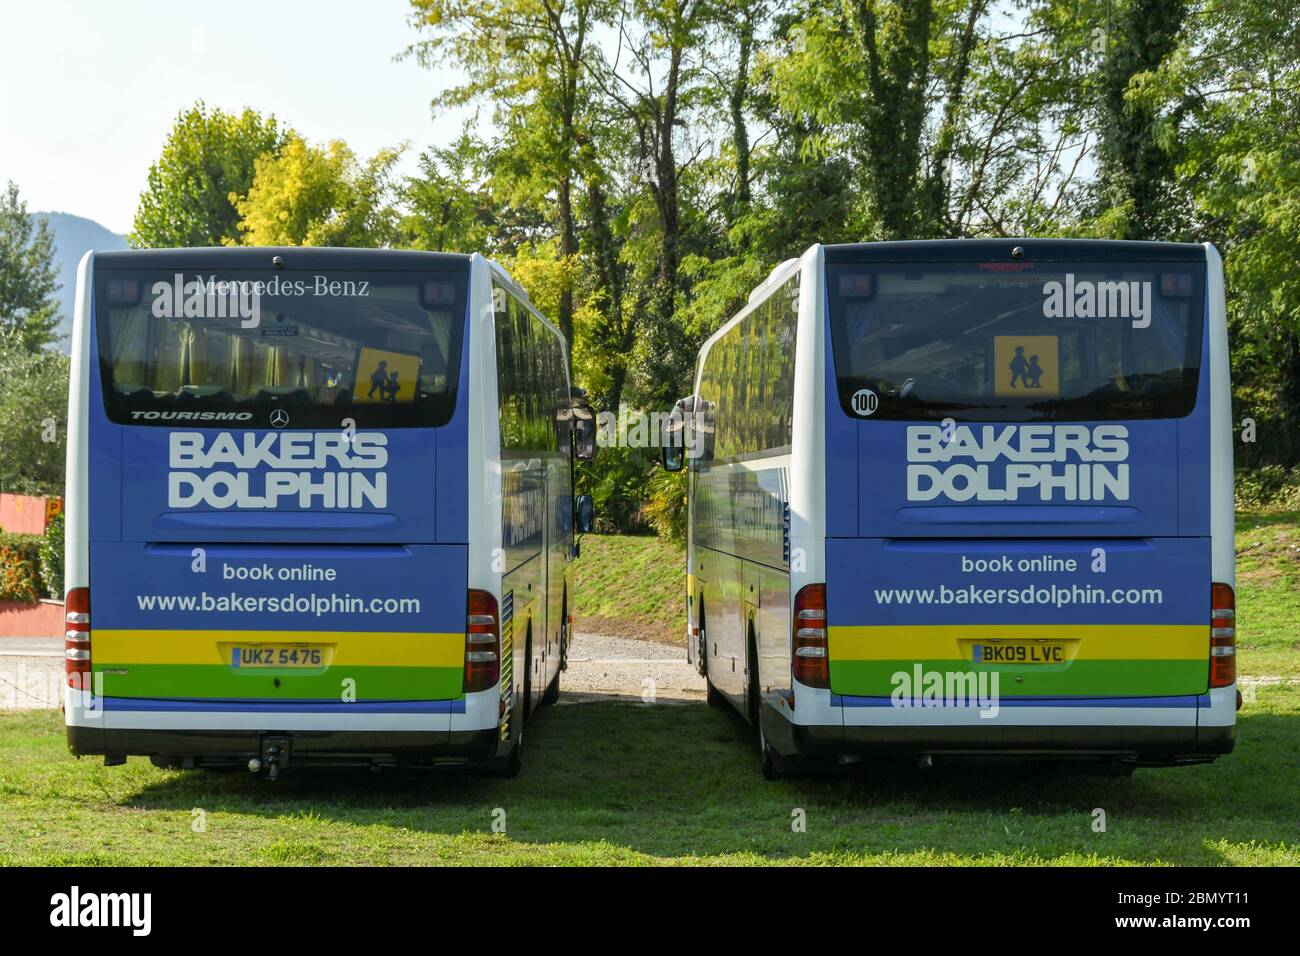 GARDA, LAKE GARDA, ITALY - SEPTEMBER 2018: Two coaches operated by British travel company Bakers Dolphin parked side by side in the grounds of a hotel Stock Photo